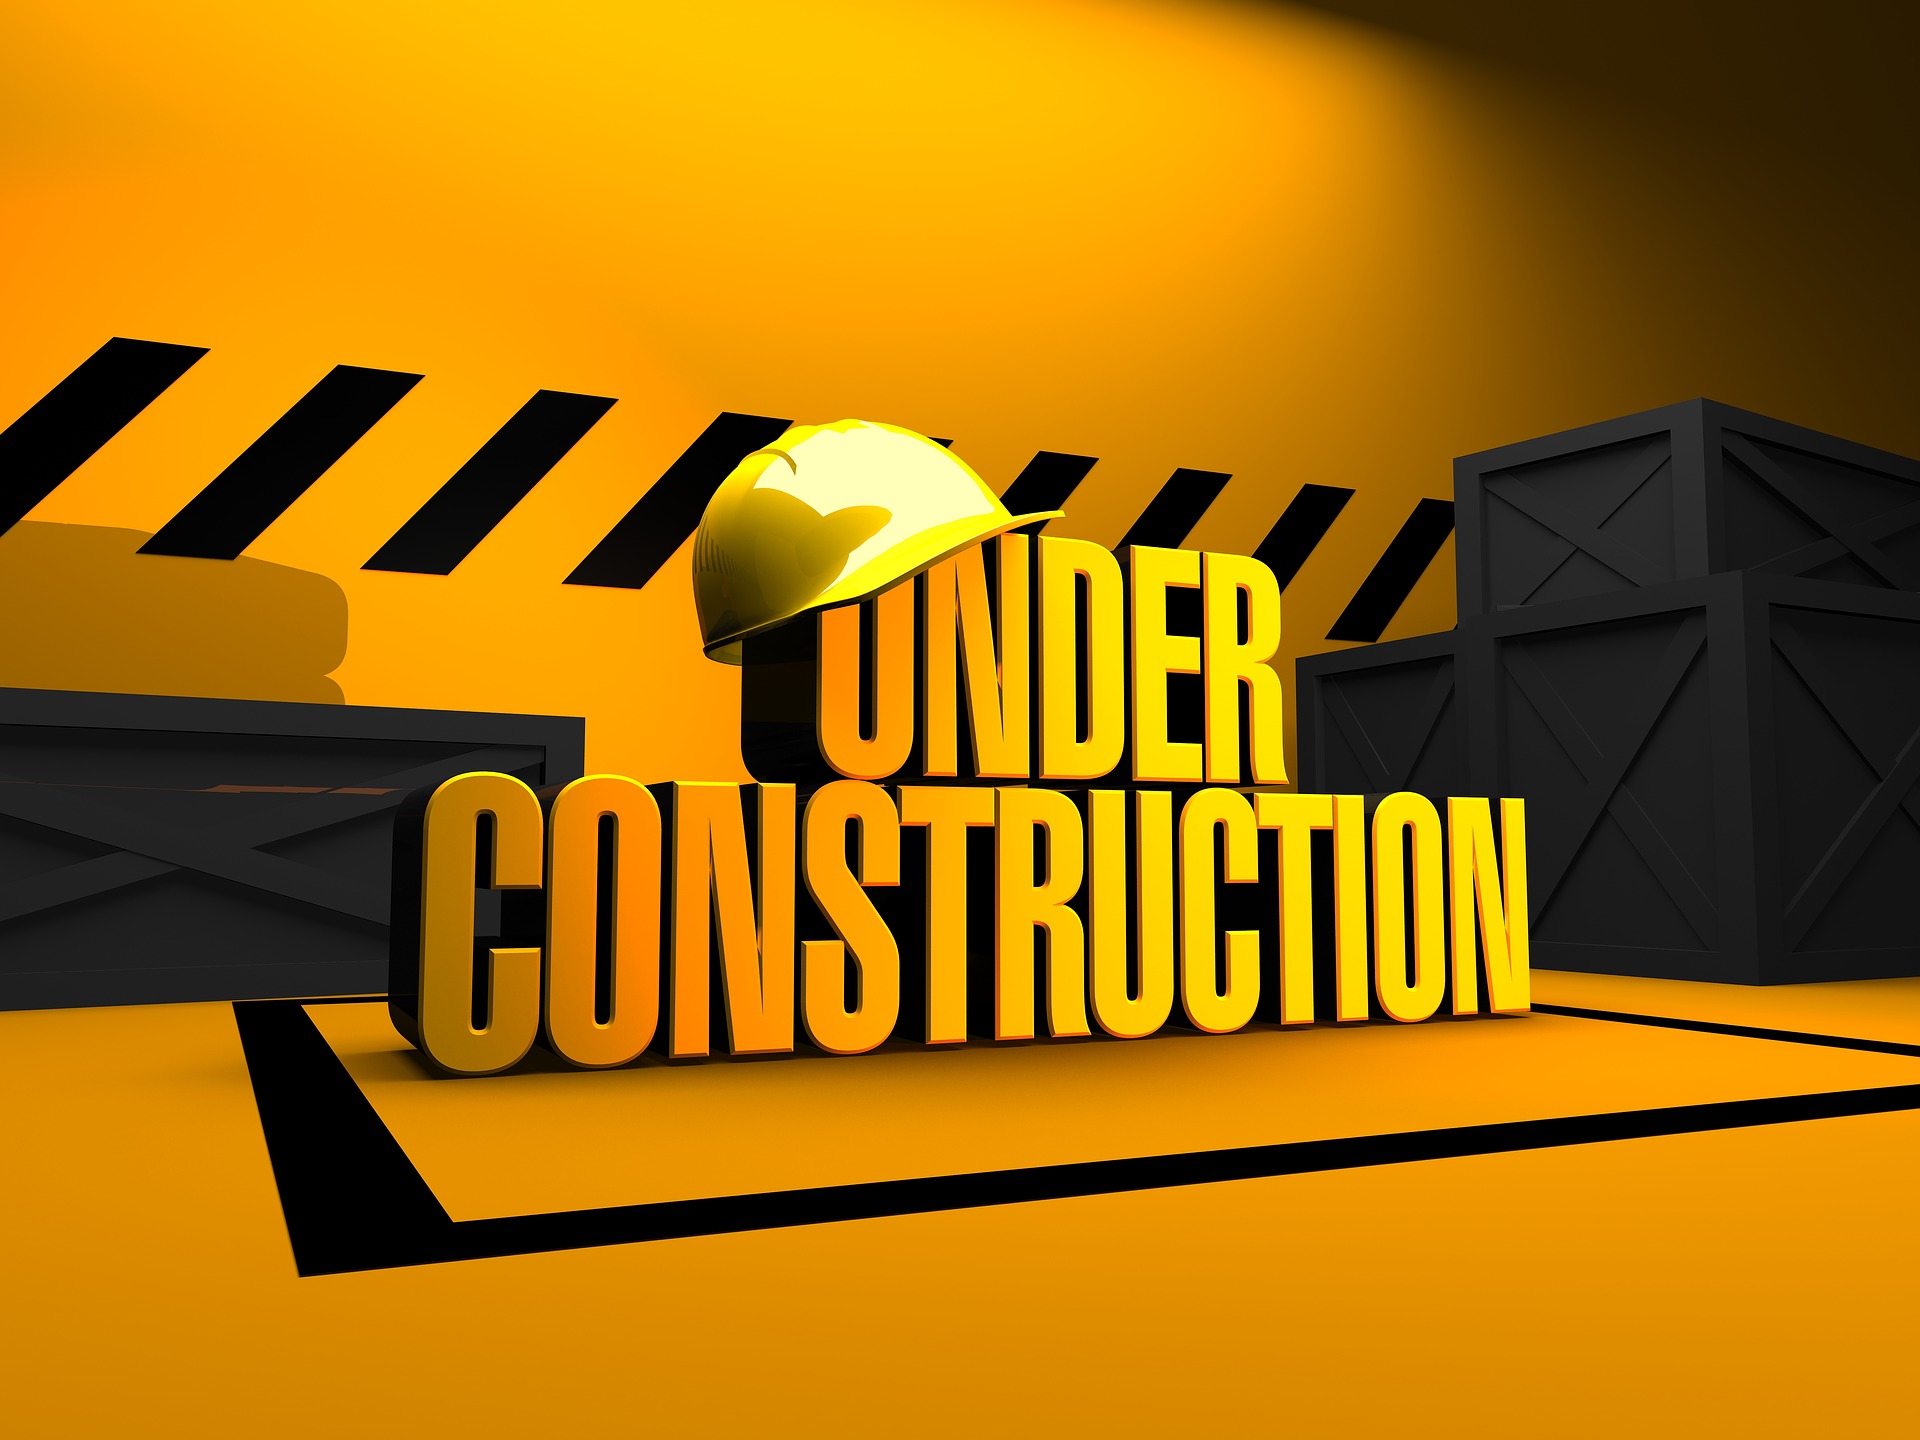 We are under construction!  Please be patient.